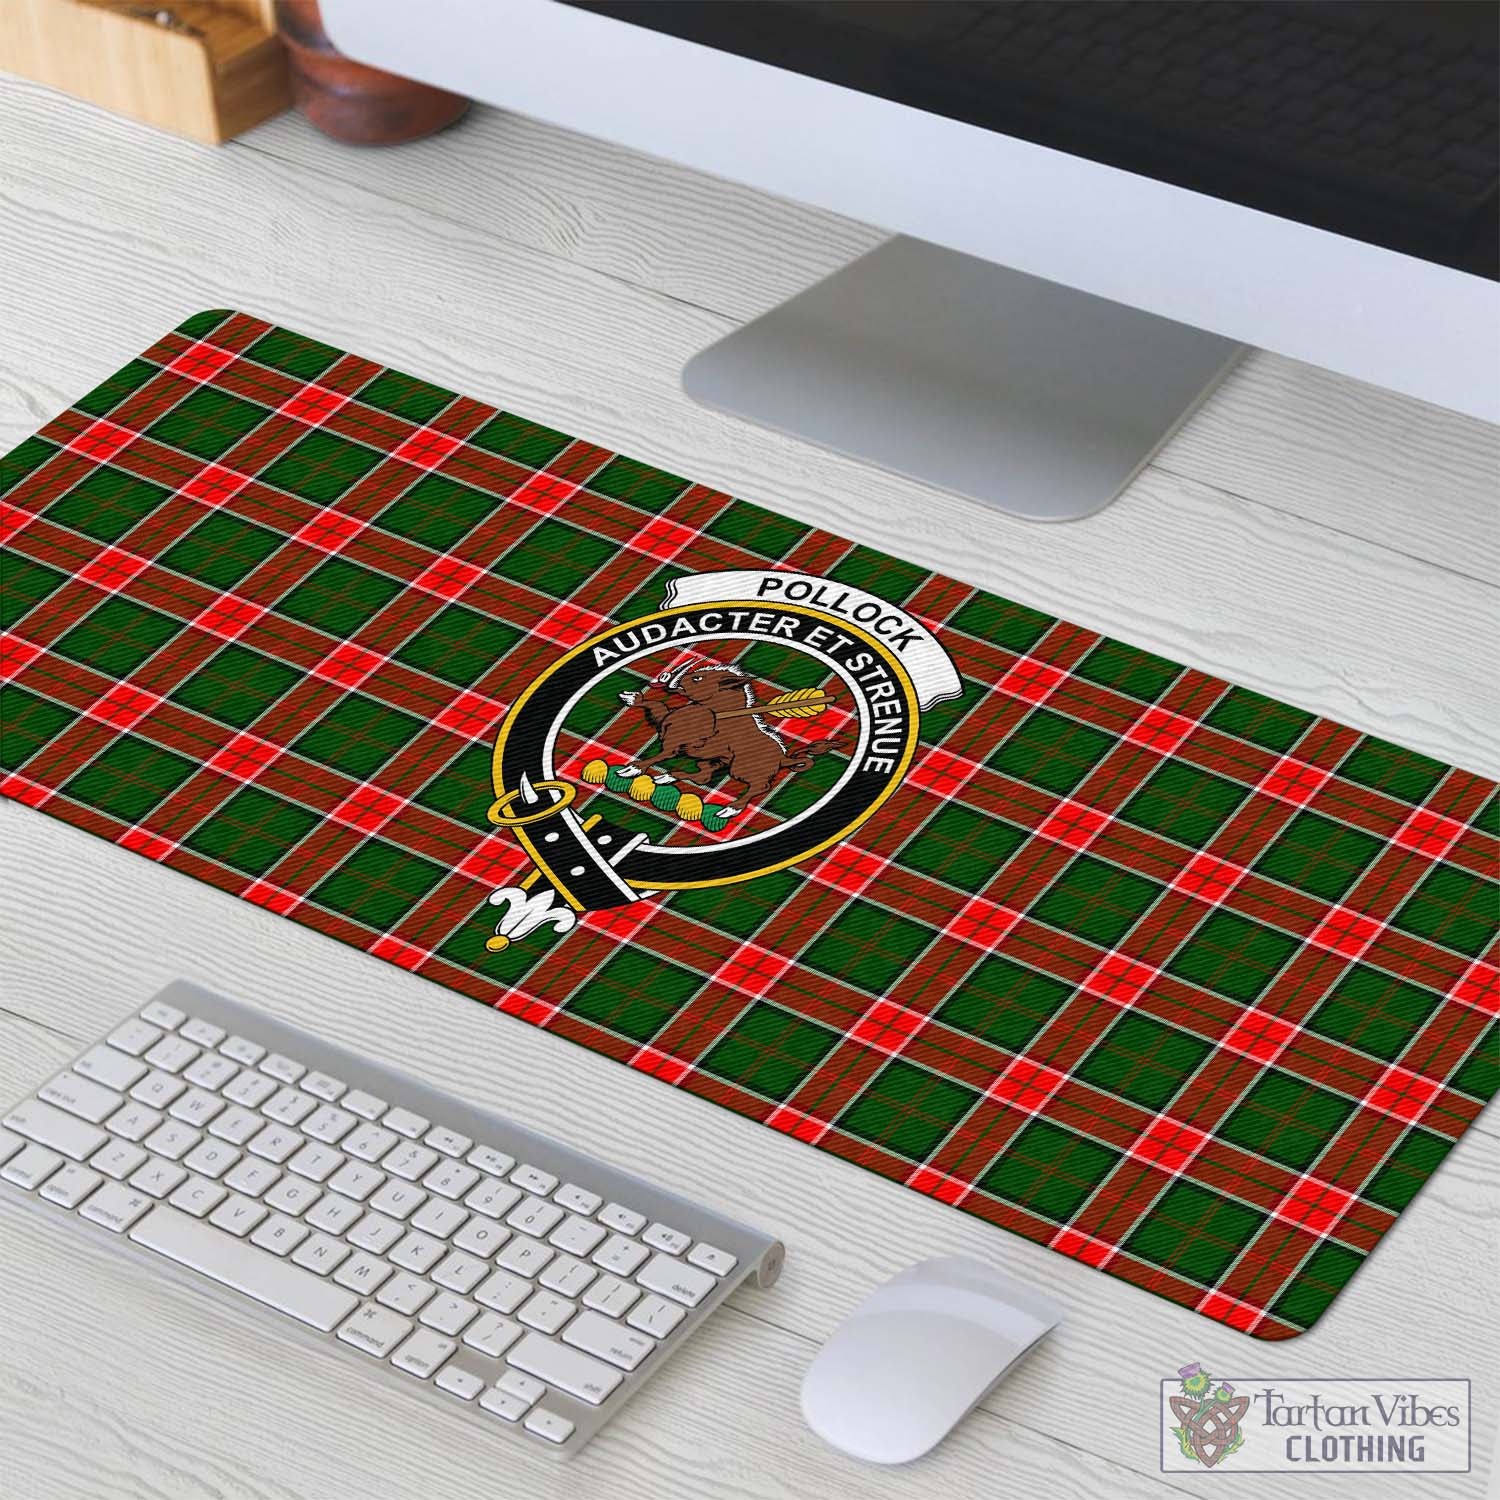 Tartan Vibes Clothing Pollock Modern Tartan Mouse Pad with Family Crest